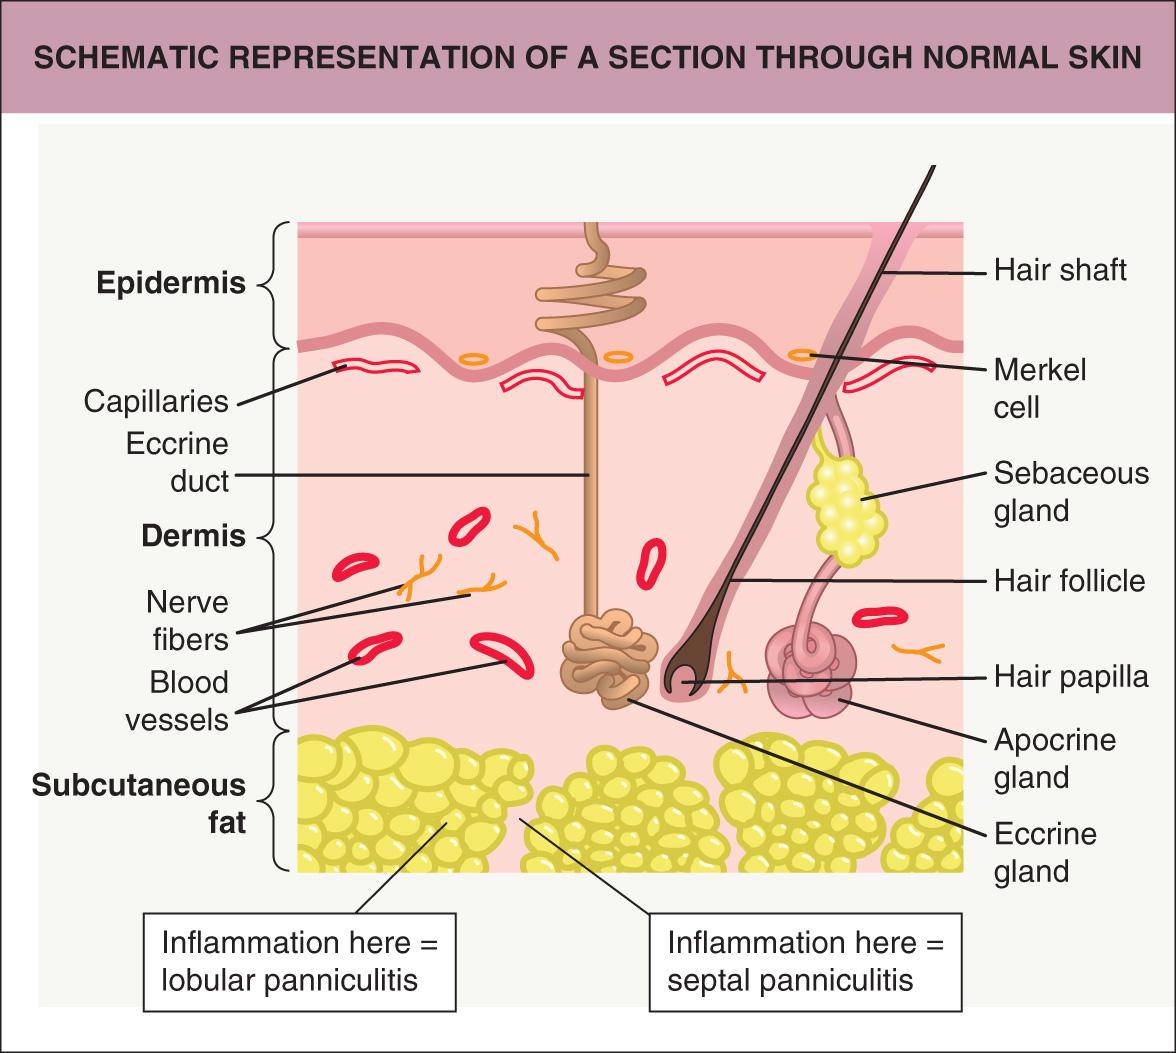 Fig. 1.1, Schematic representation of a section through normal skin.